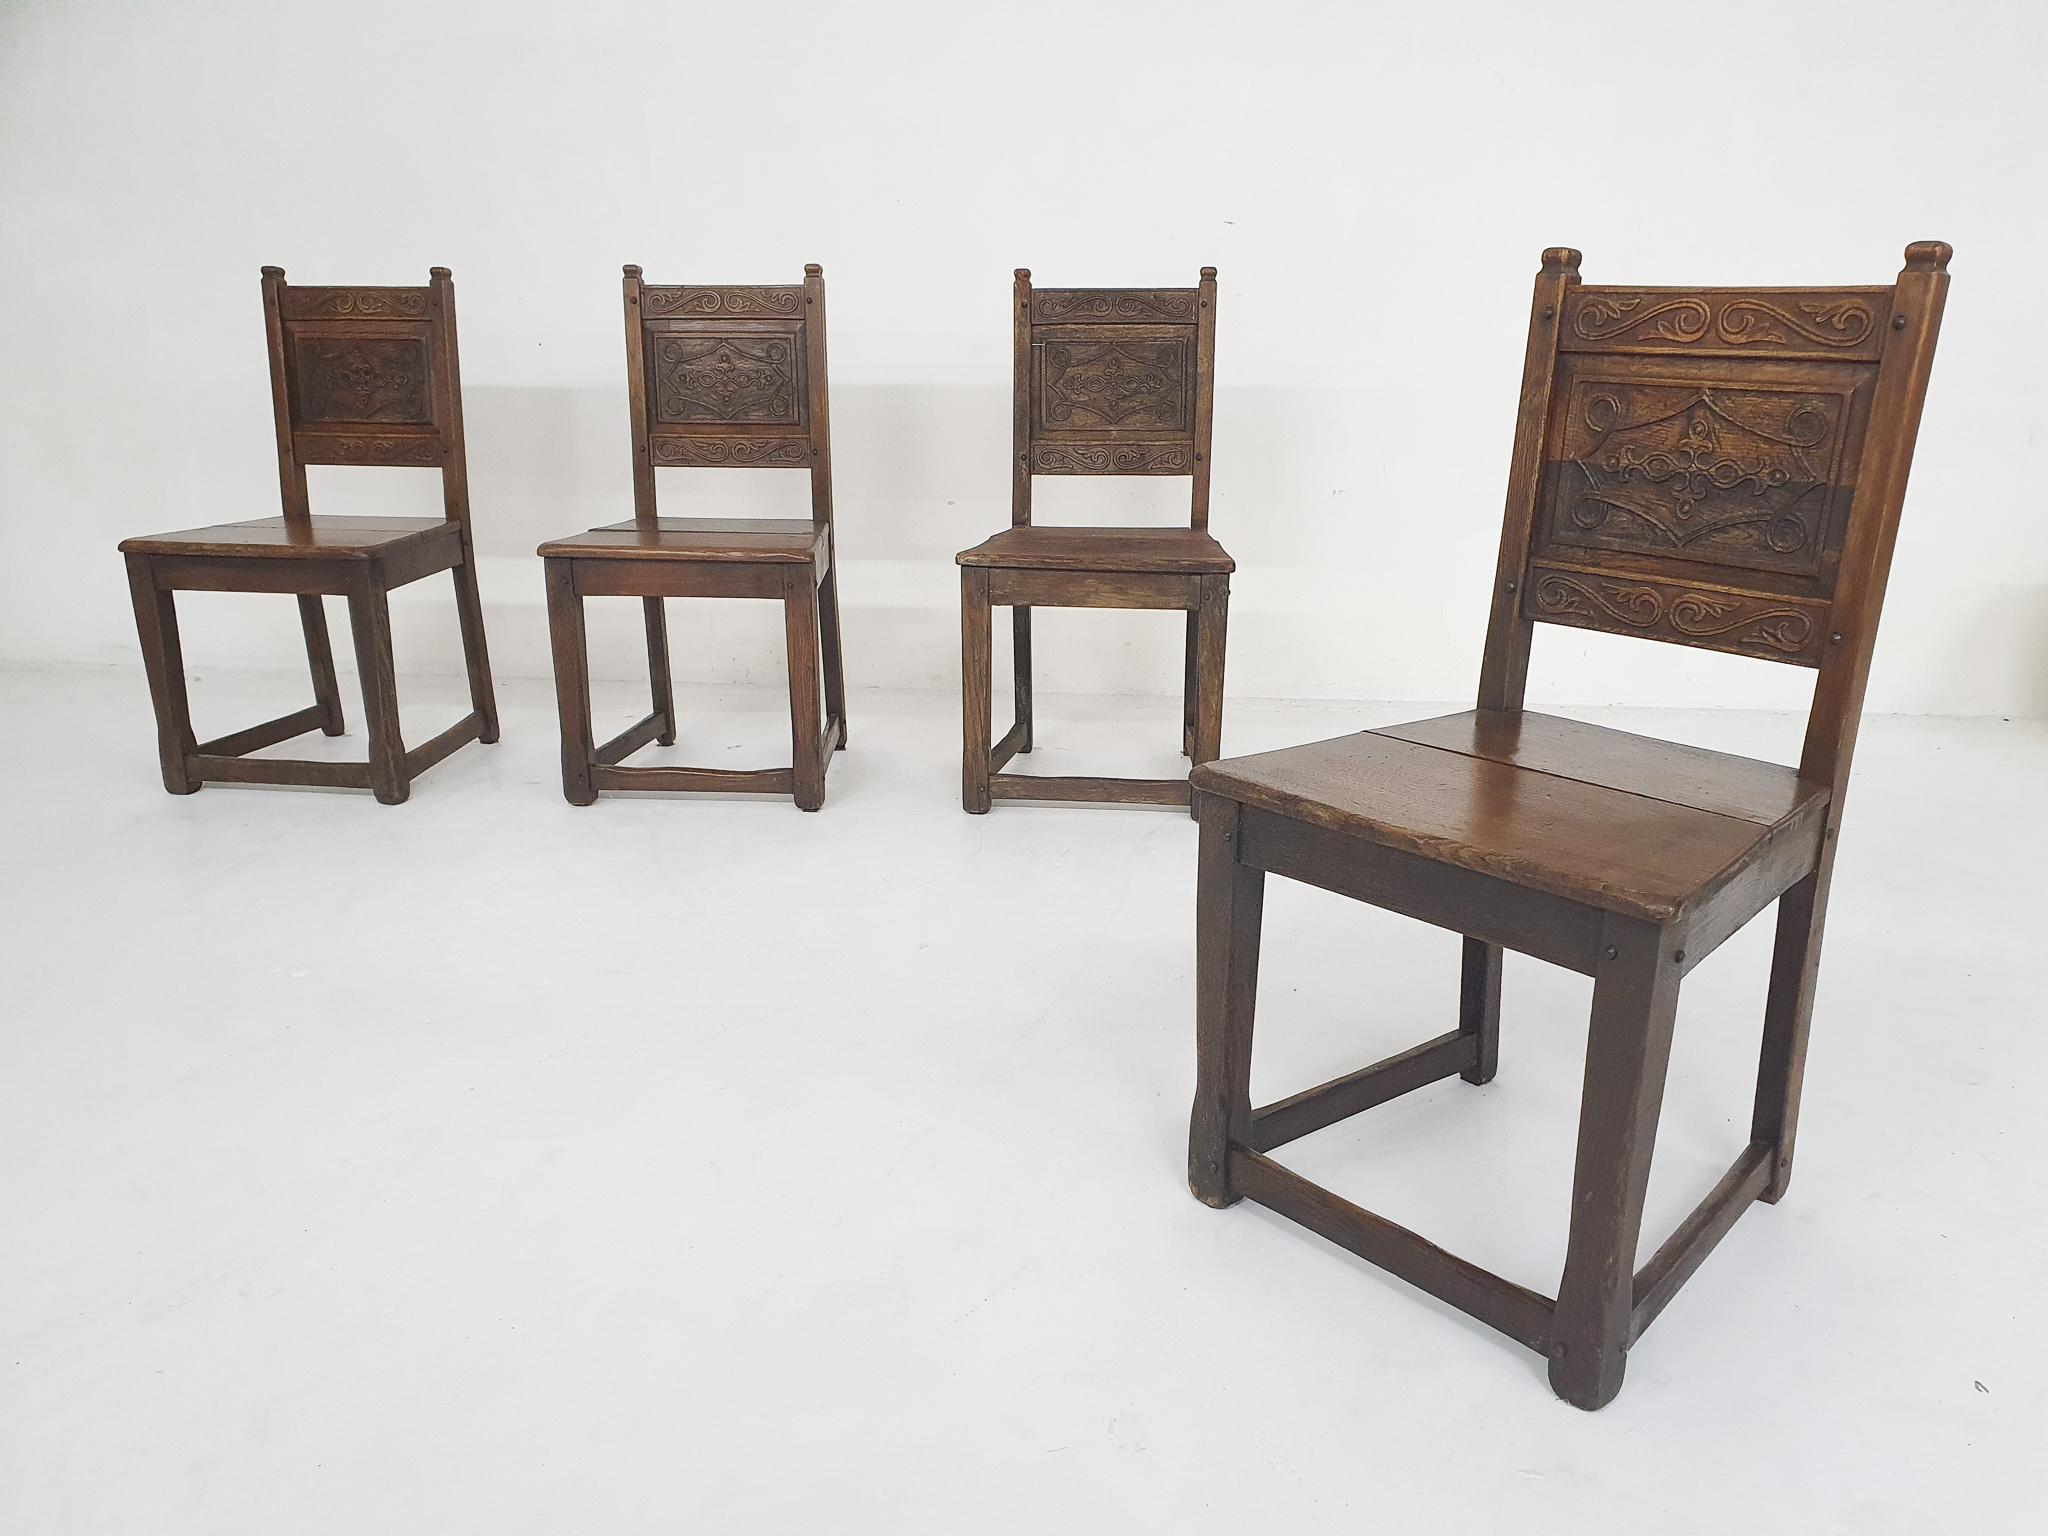 Set of four Spanish antique dining chairs, 1930's
Solid oak antique dining chairs, with hand carved back rests. The chairs have no screws only wooden joints, which makes the chairs a little wobly, but stable enough to sit on.